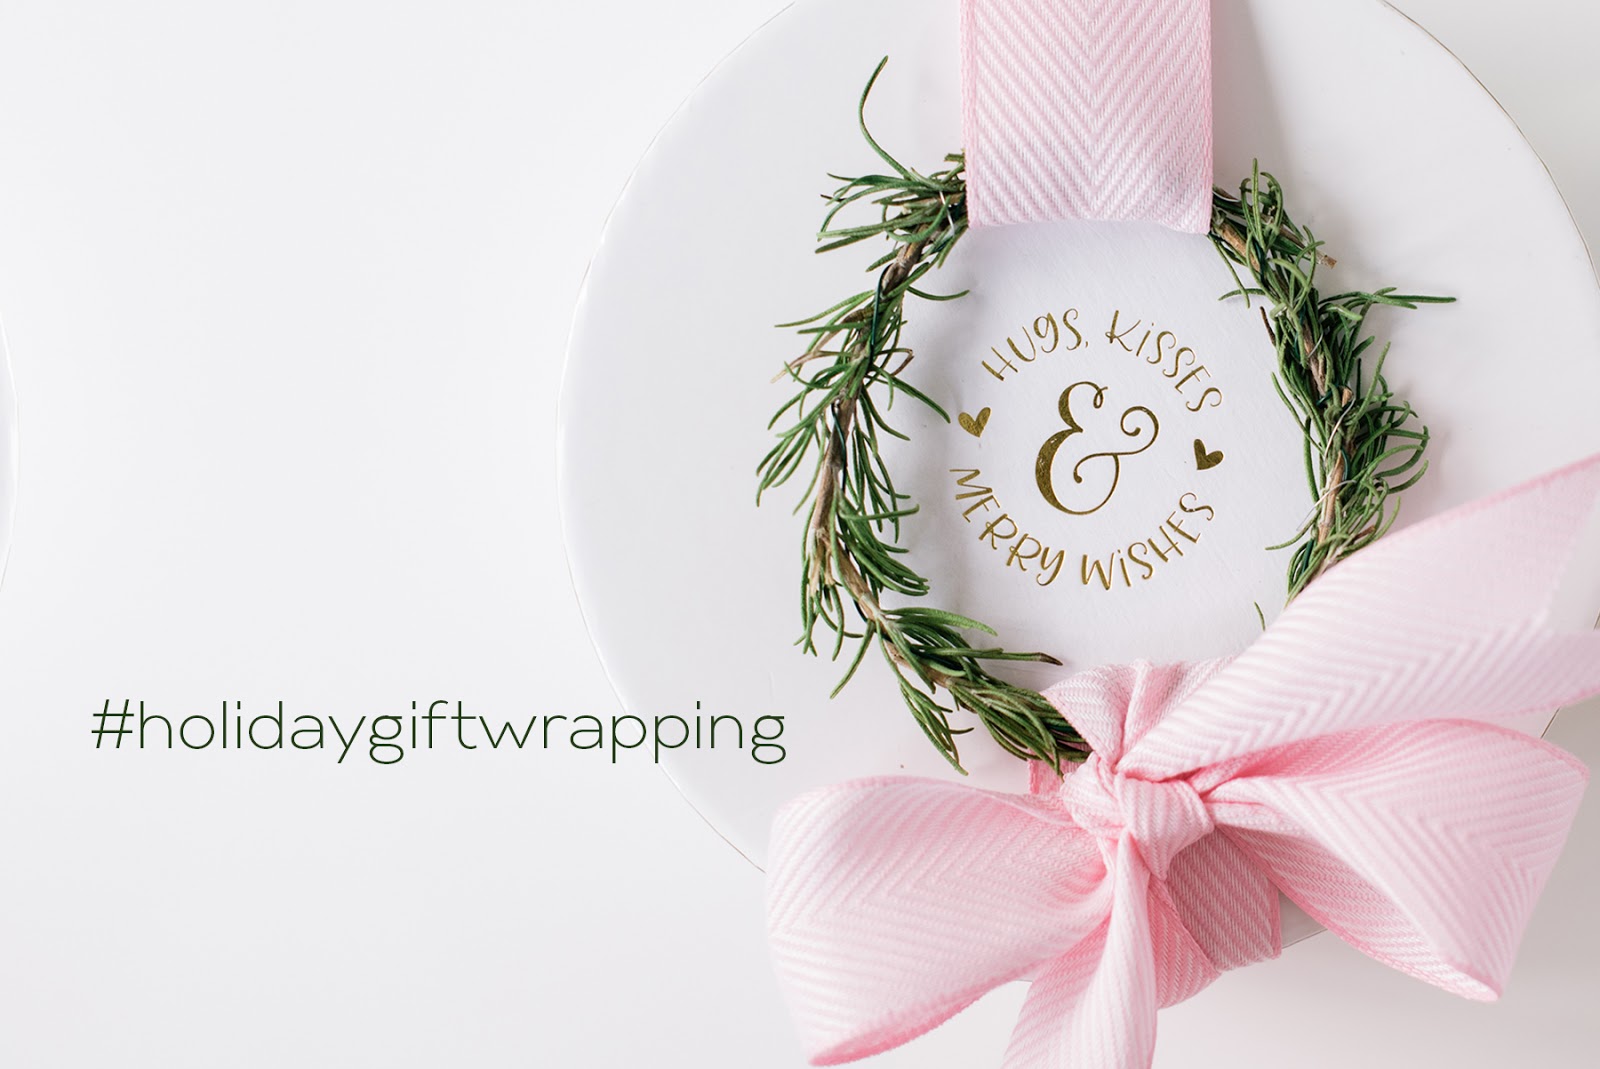 holiday gift wrapping inspiration from Creative Bag